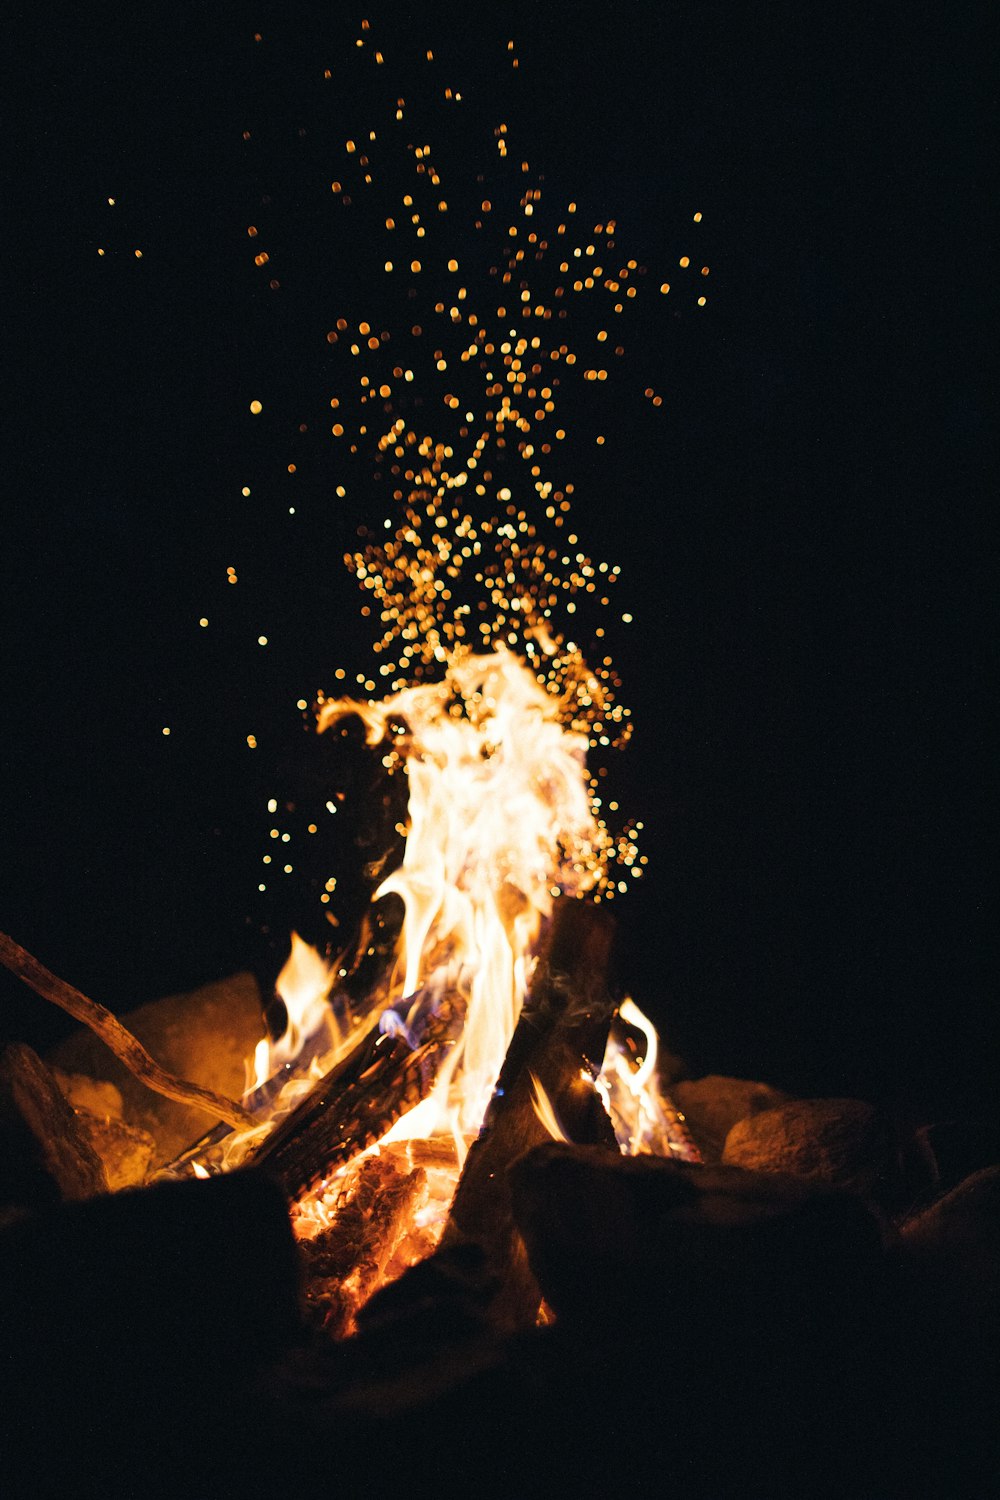 fire in the middle of a bonfire